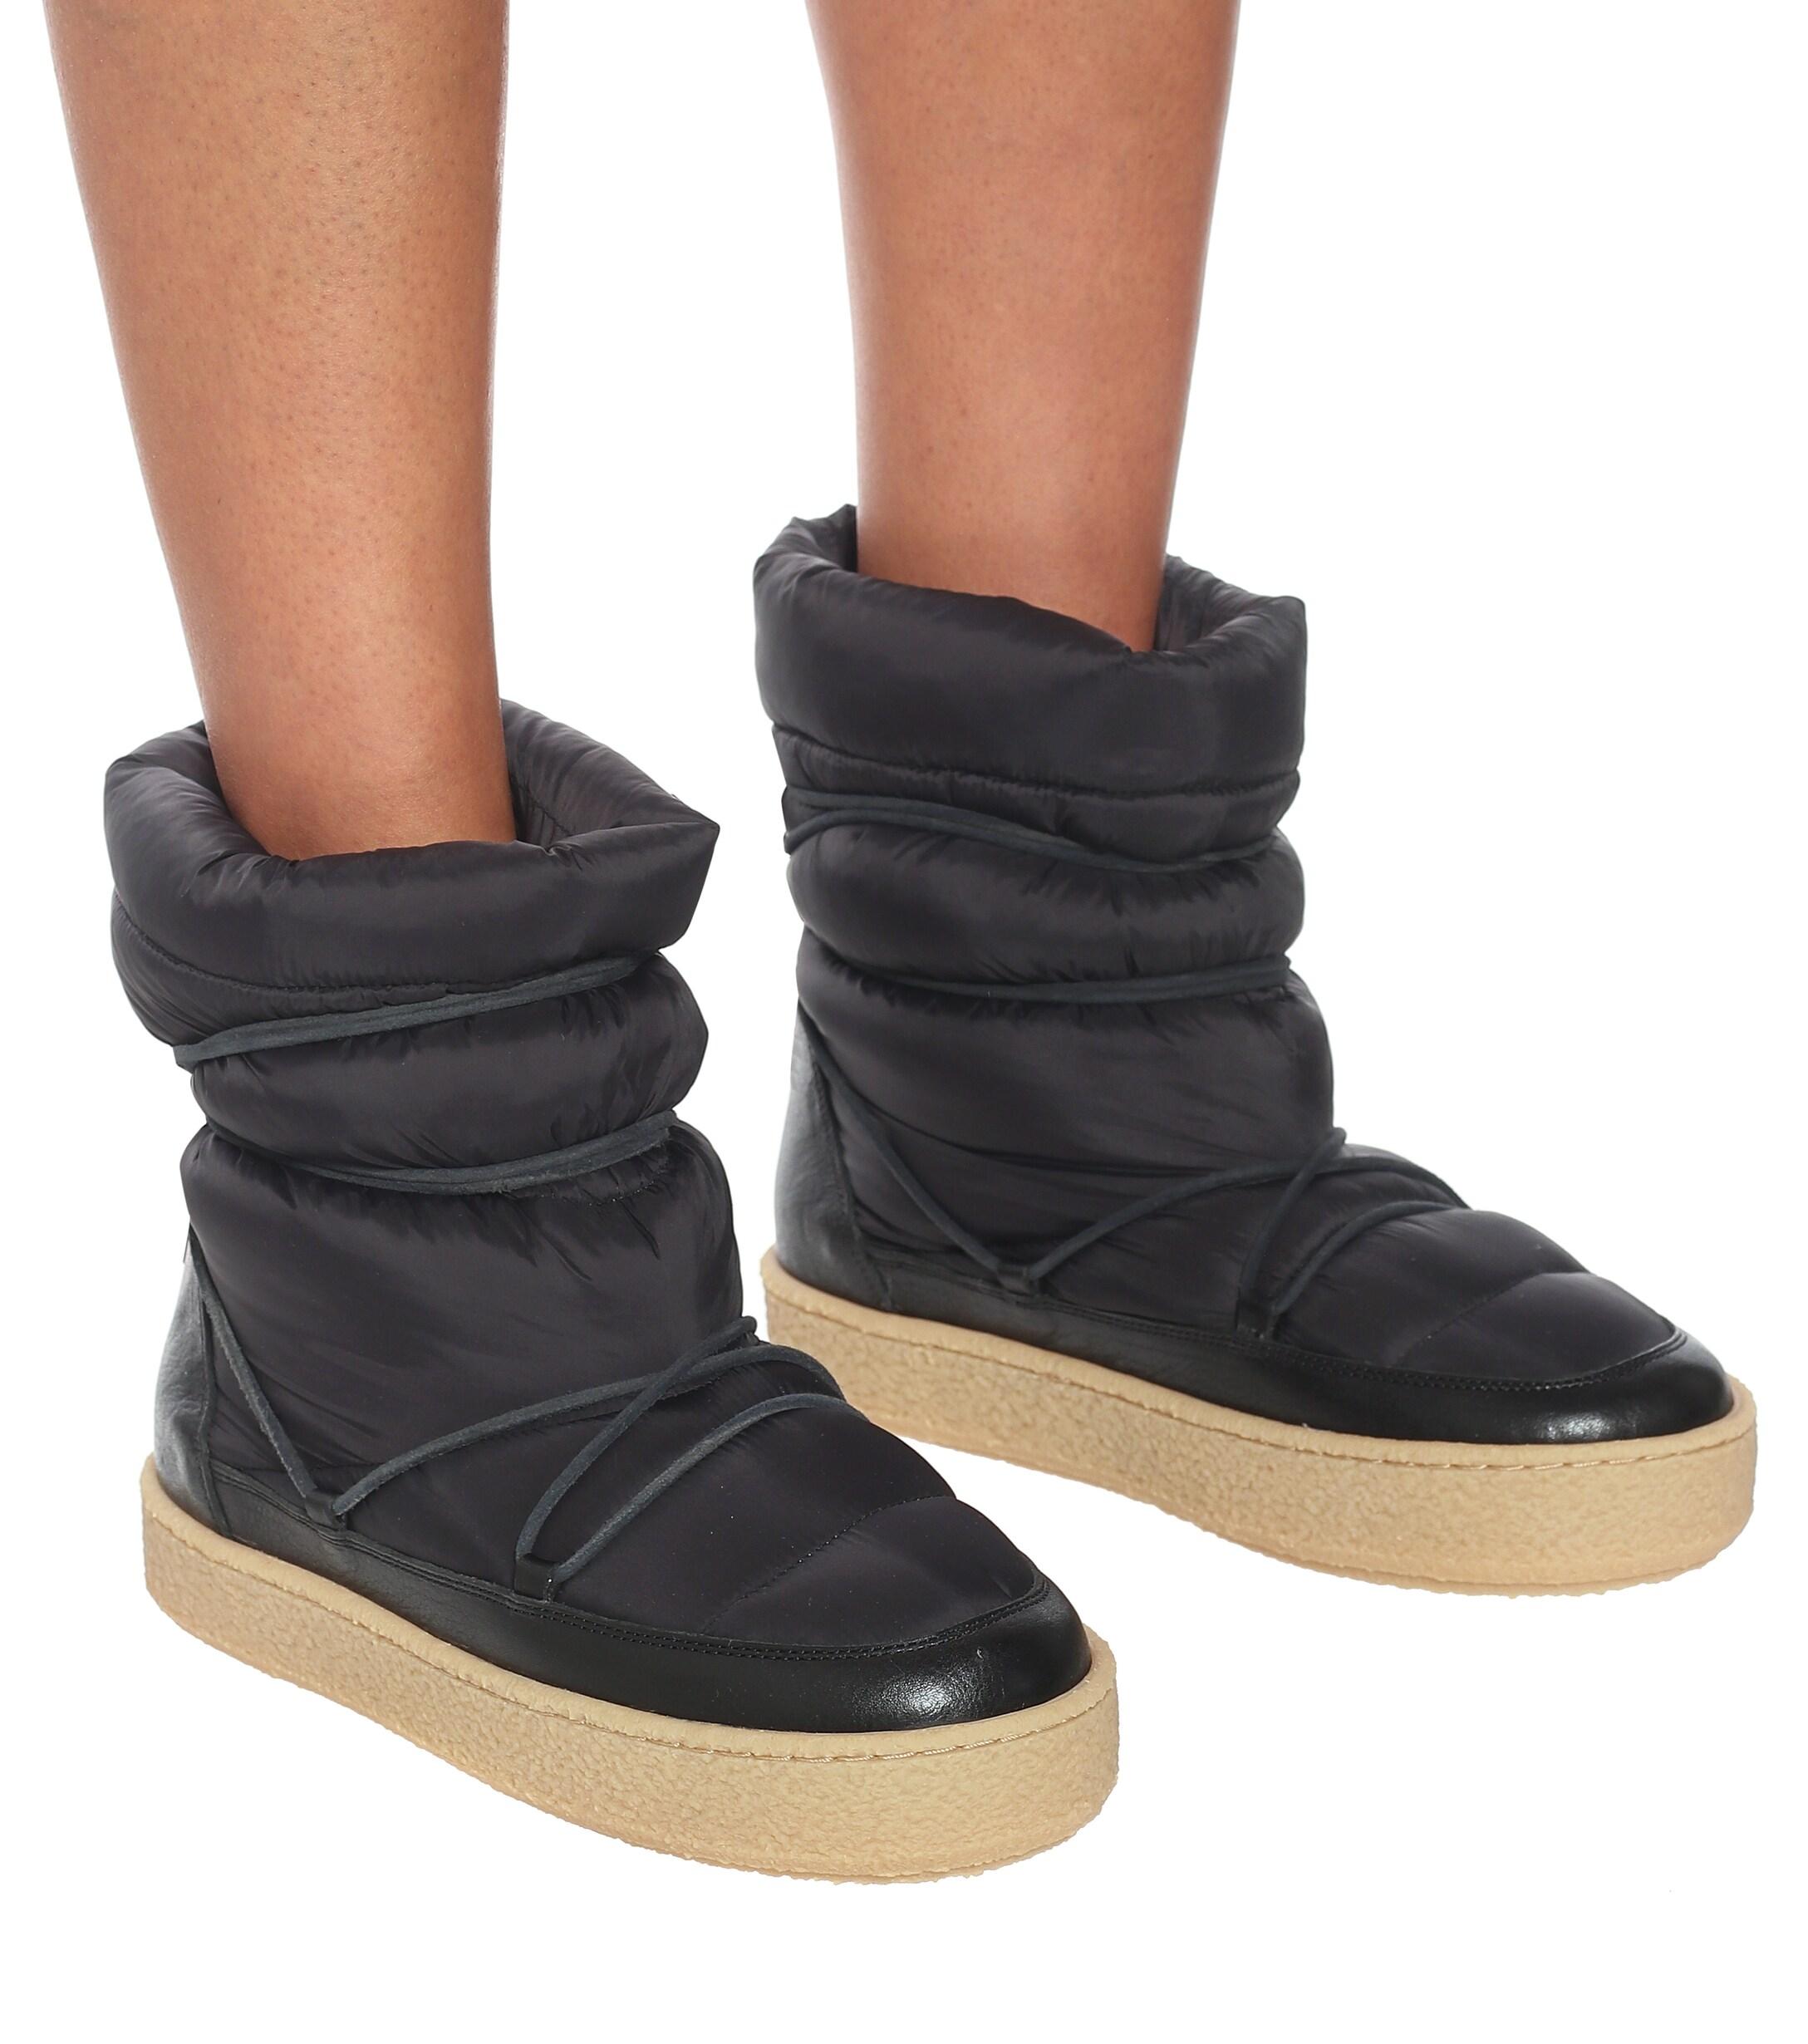 Isabel Marant Zimlee Padded Snow Boots in Black - Lyst